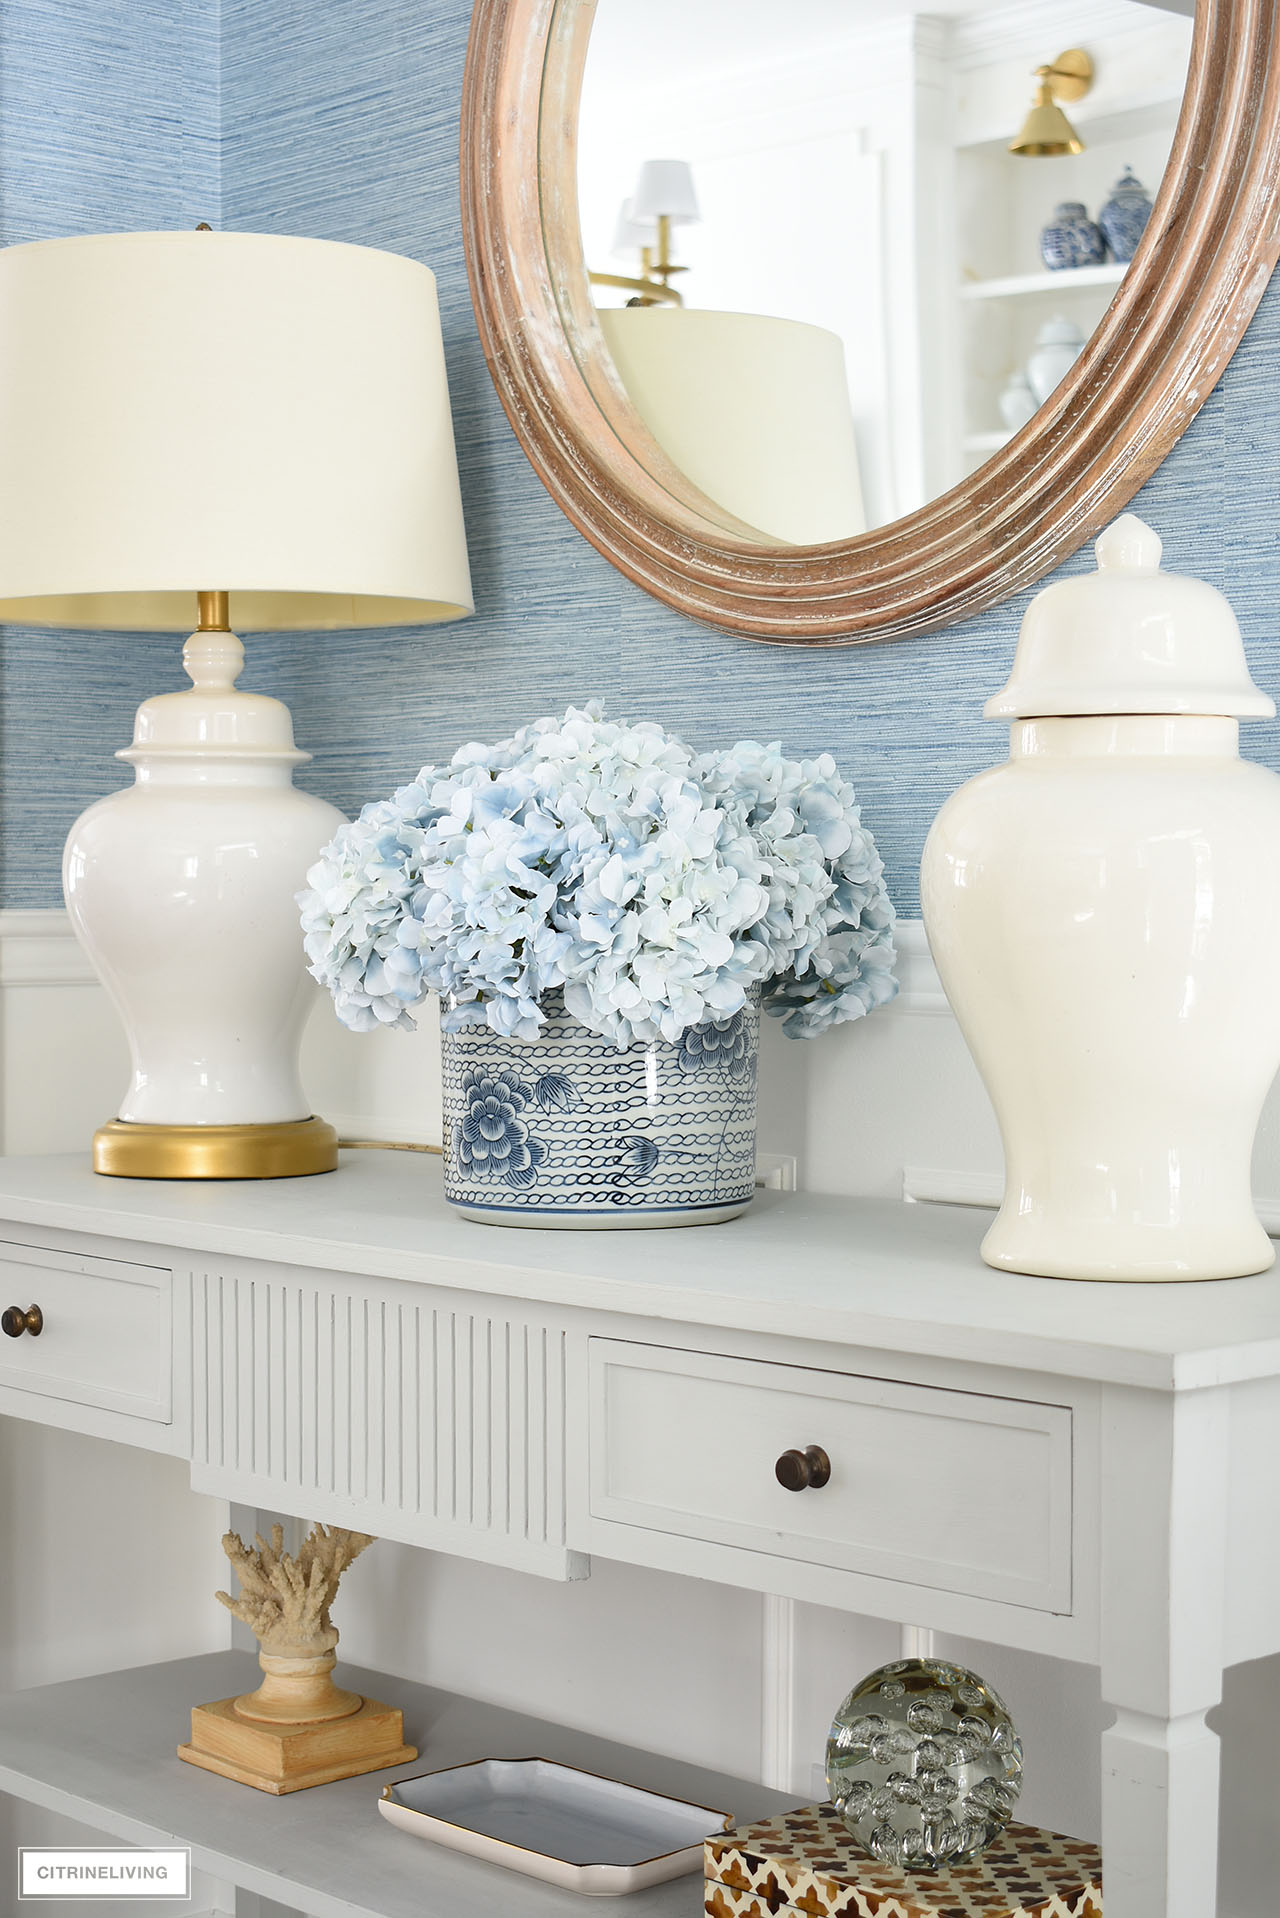 A beautiful blue and white planter with light blue hydrangeas is a chic and elegant focal point on this classic console table.